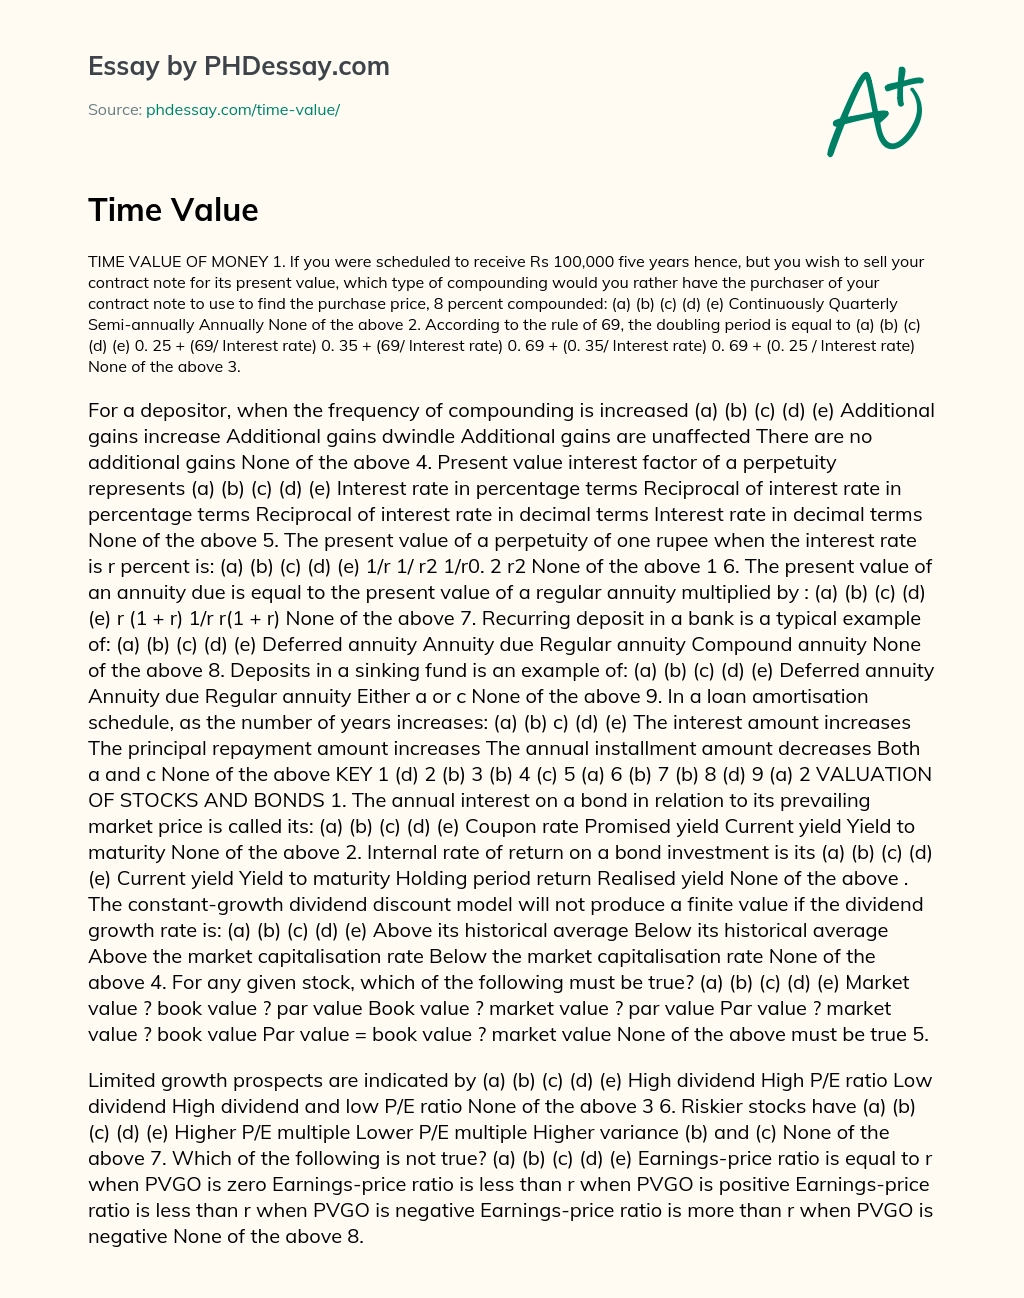 Understanding the Time Value of Money: Compounding, Doubling Period, and Perpetuity essay